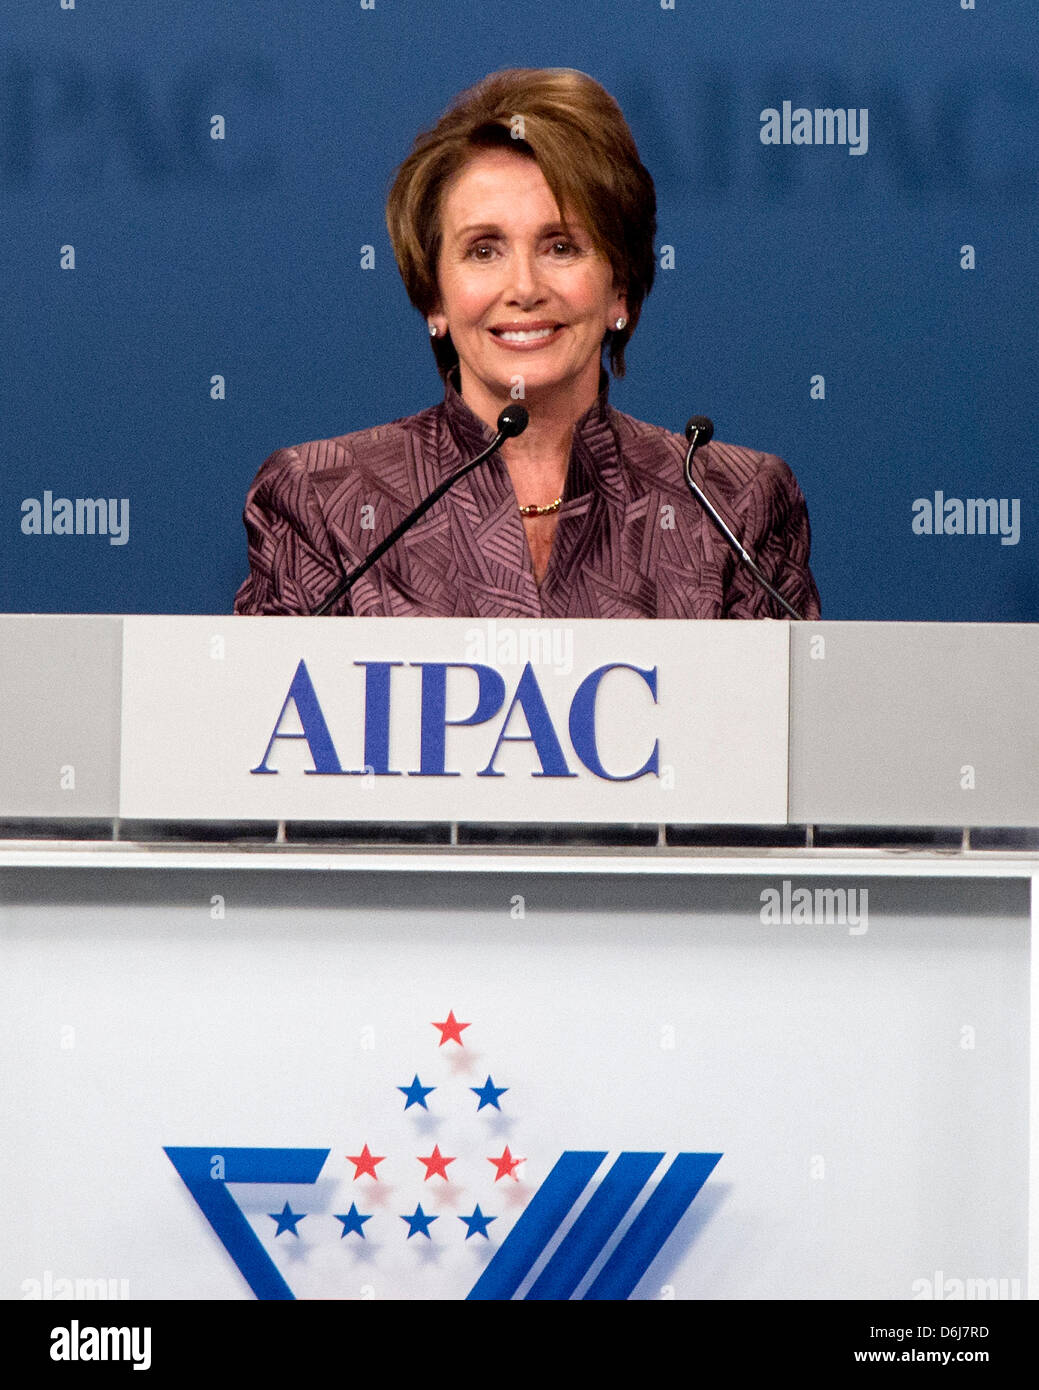 United States House Democratic Leader Nancy Pelosi (Democrat of California) speaks at the annual American Israel Public Affairs Committee (AIPAC) Policy Conference at the Washington Convention Center in Washington, D.C. on Monday, March 5, 2012. Credit: Ron Sachs / CNP Stock Photo